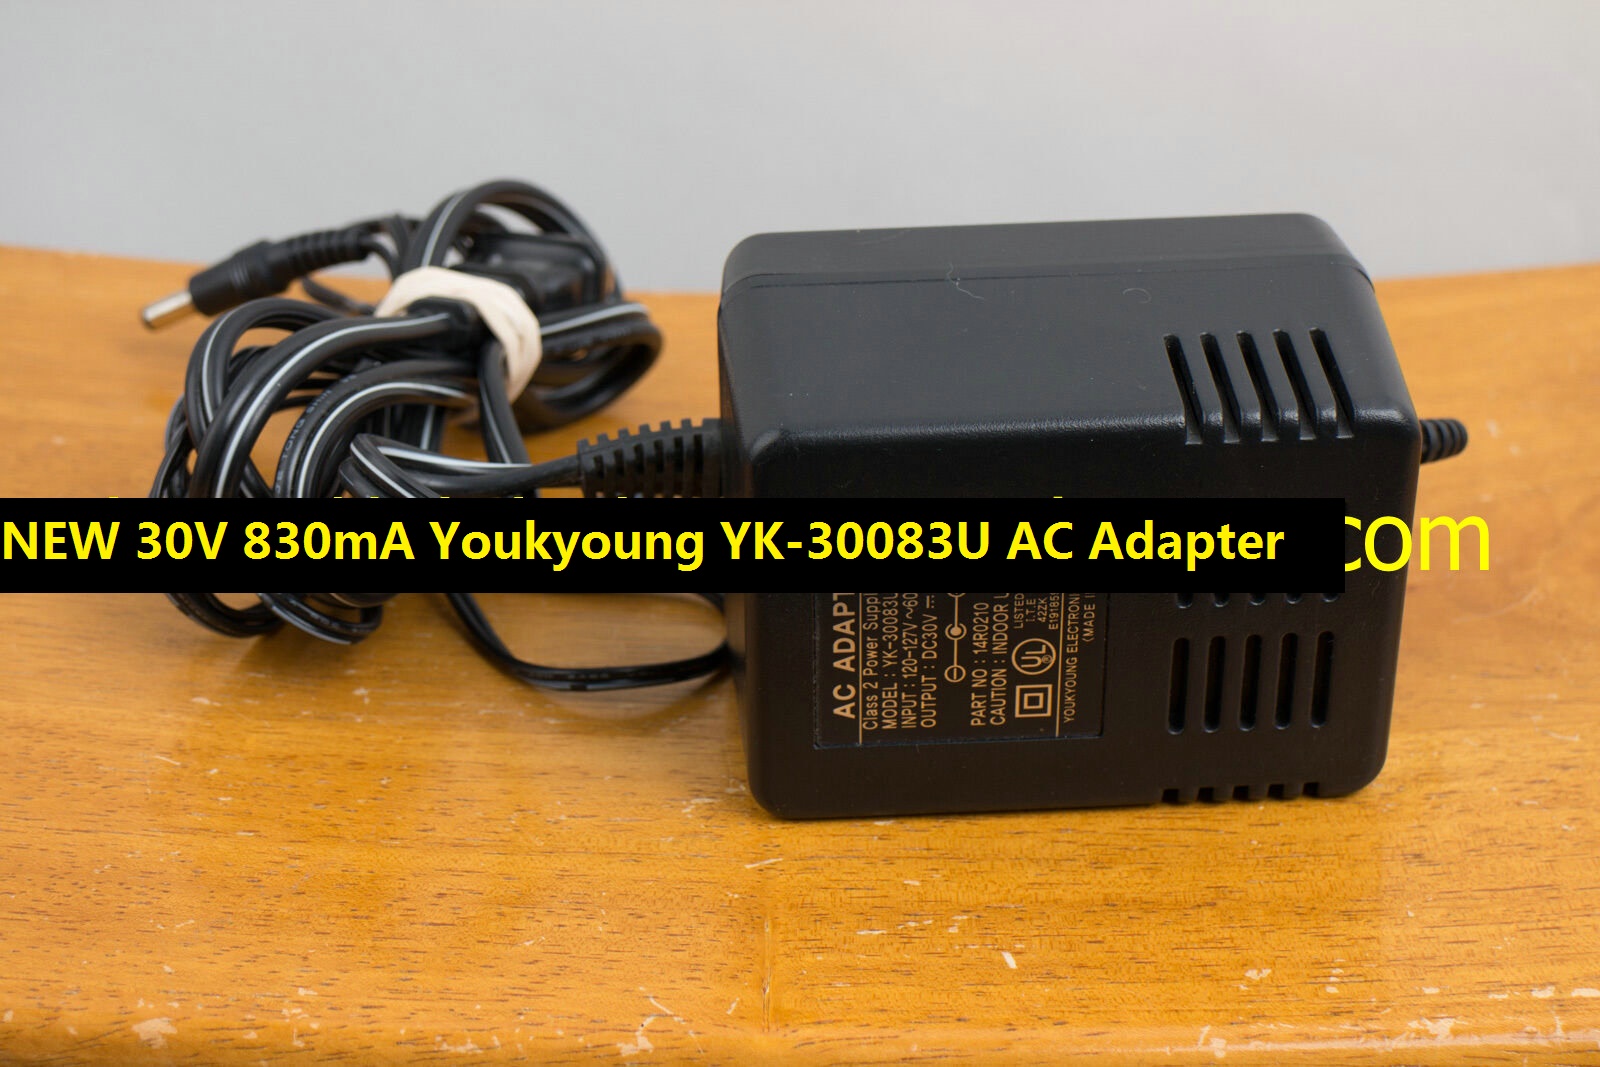 *100% Brand NEW* 30V 830mA AC Adapter 14R0210 Youkyoung YK-30083U Power Supply